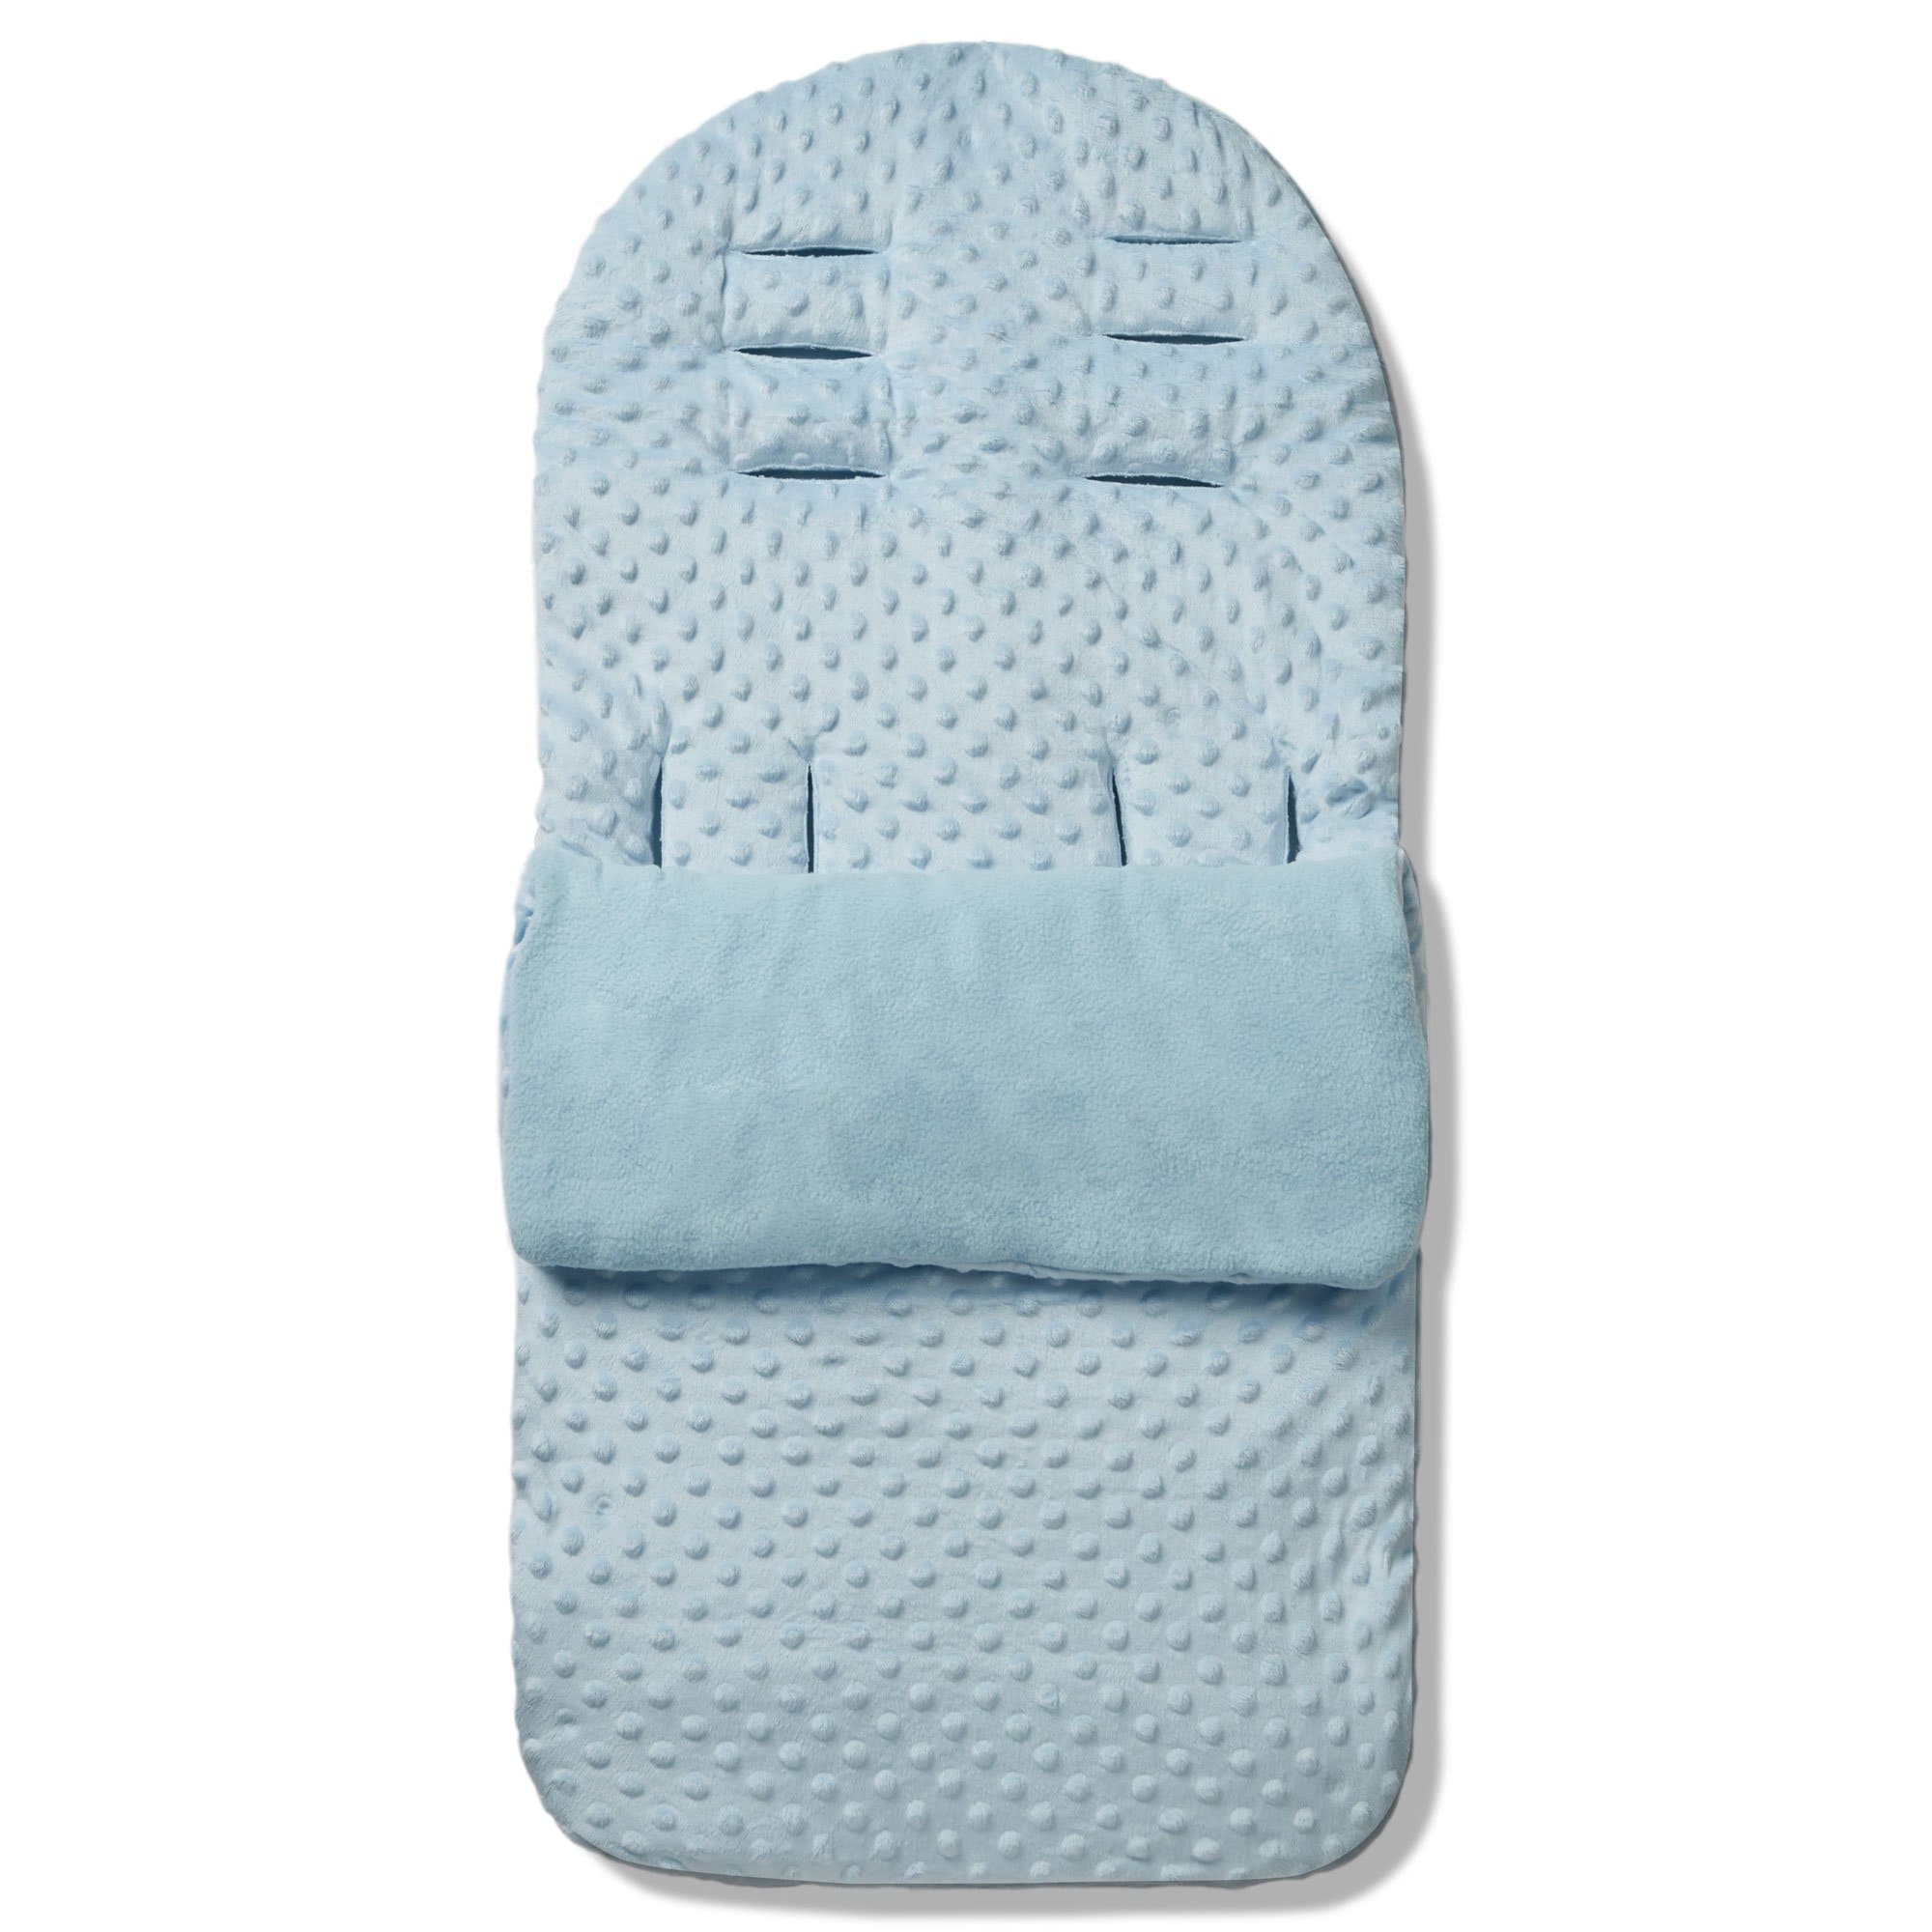 Dimple Footmuff / Cosy Toes Compatible with Urban Detour - Blue / Fits All Models | For Your Little One